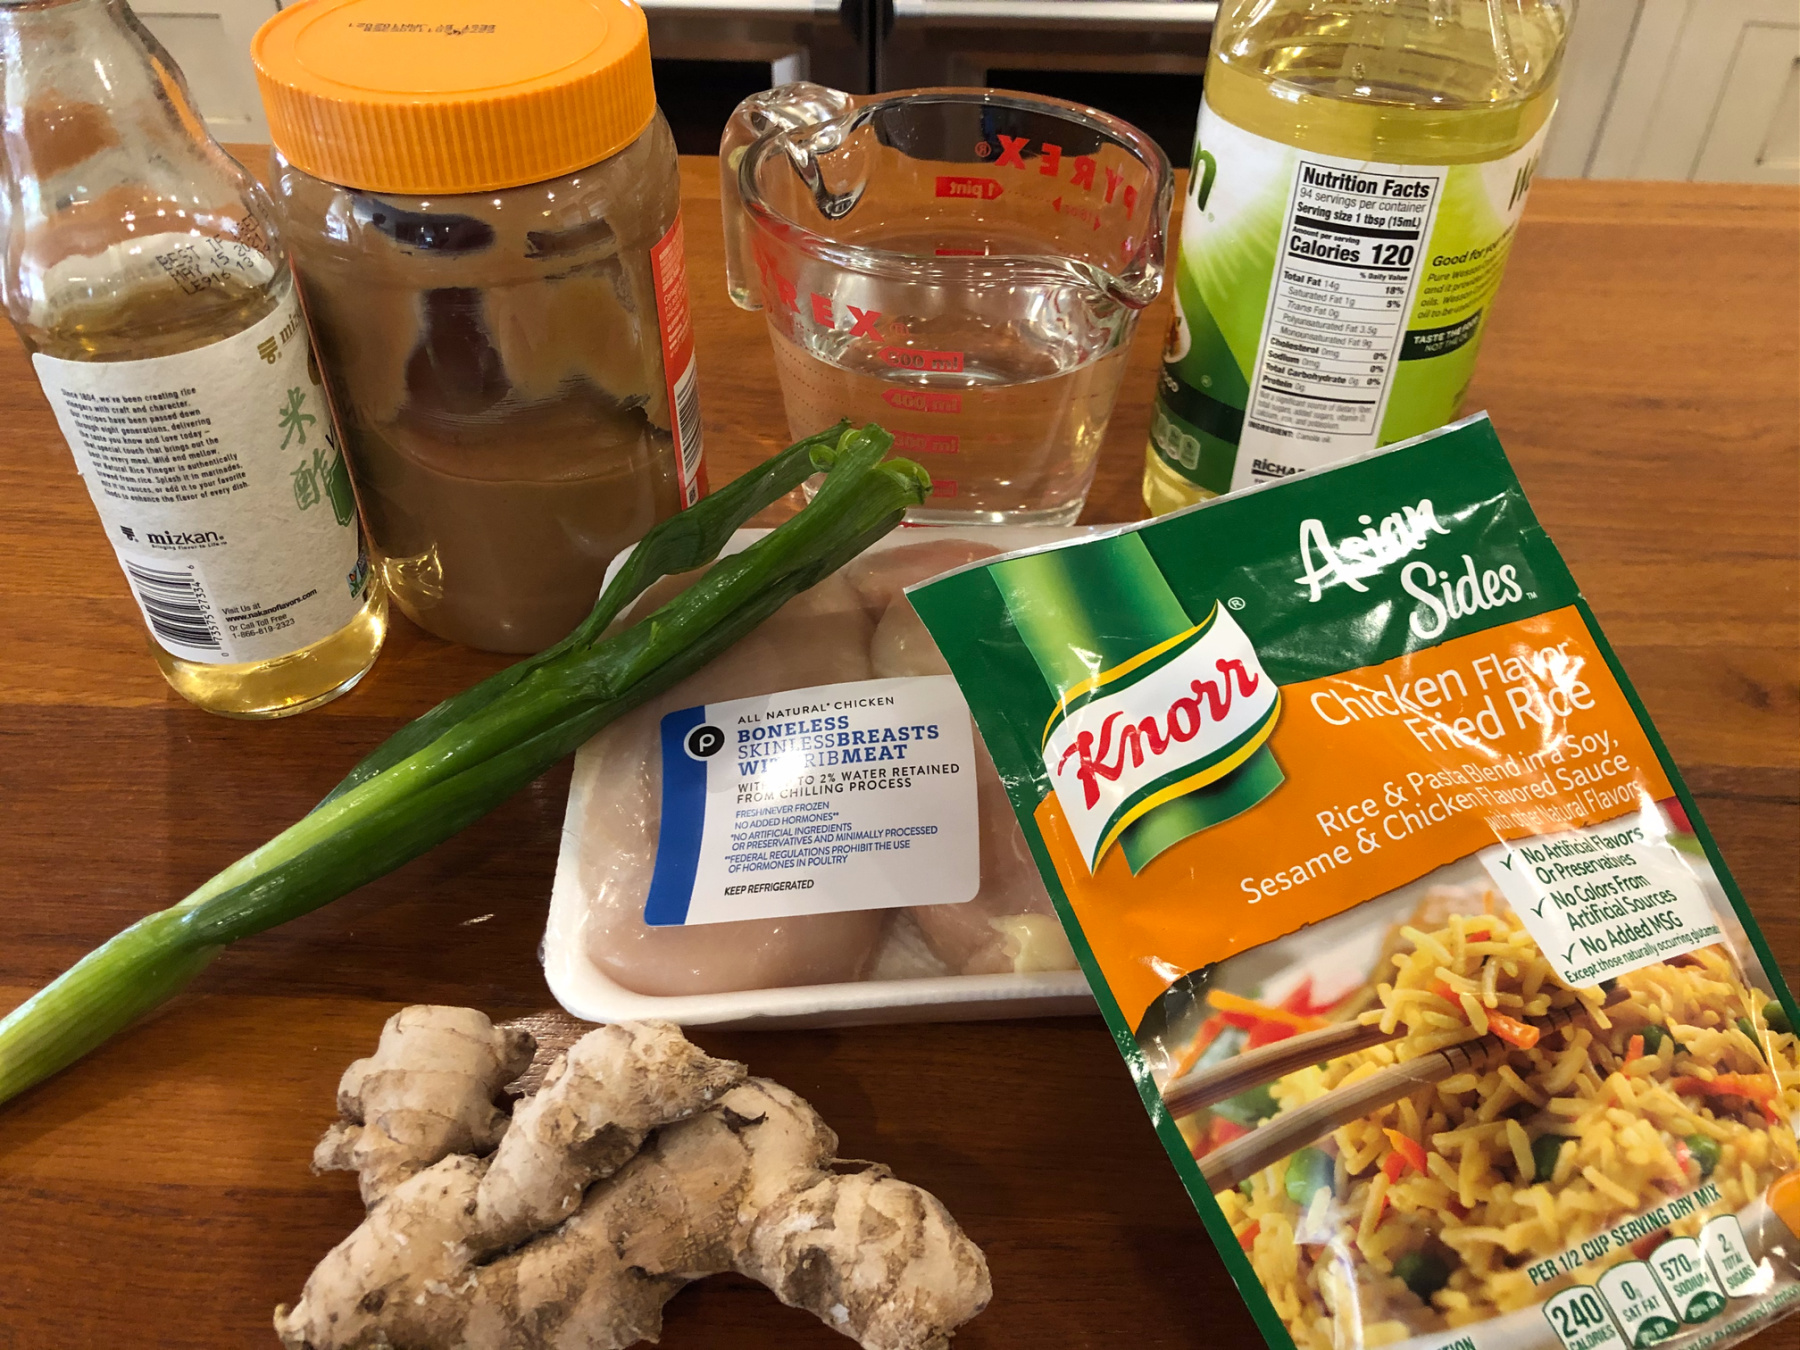 Try This Peanut Chicken Fried Rice & Save On Tasty Knorr Products At Publix on I Heart Publix